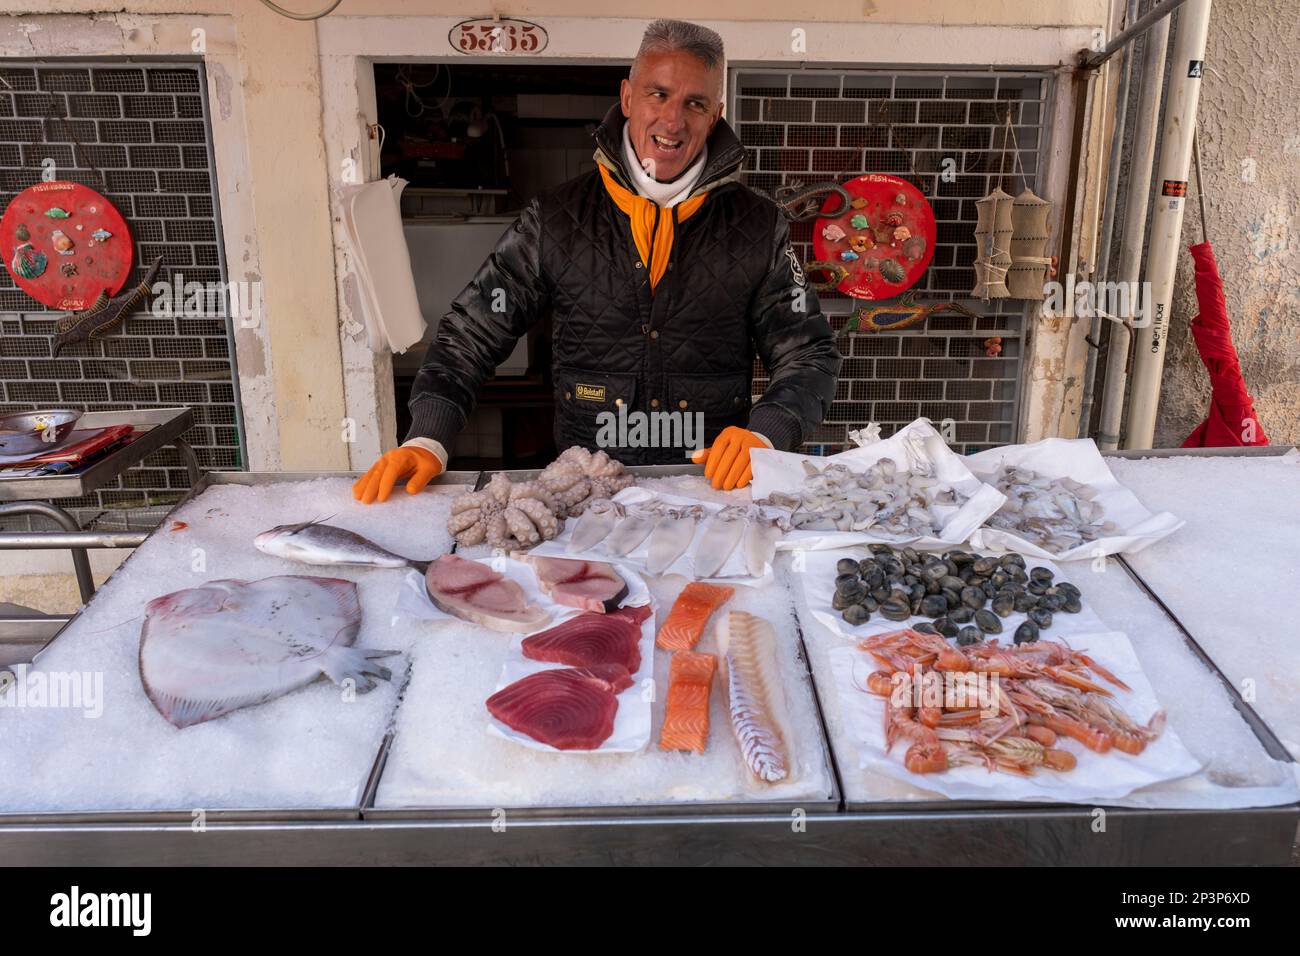 Fish vender with his display of fresh fish laid out for sale, Venice, Italy Stock Photo